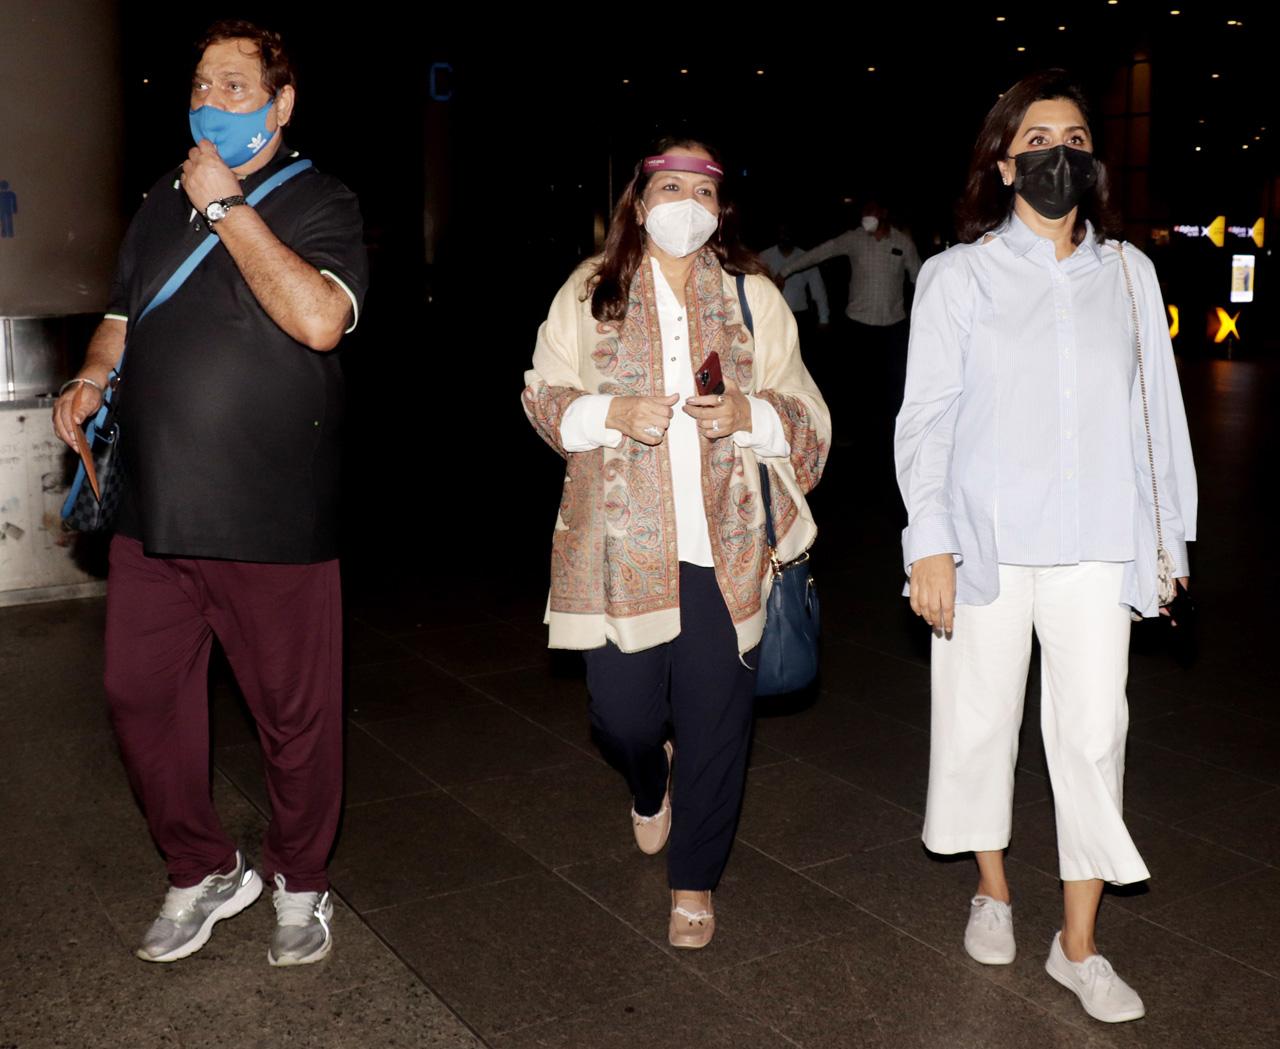 Neetu Kapoor along with filmmaker David Dhawan and his wife Lali Dhawan were also spotted at Mumbai airport.